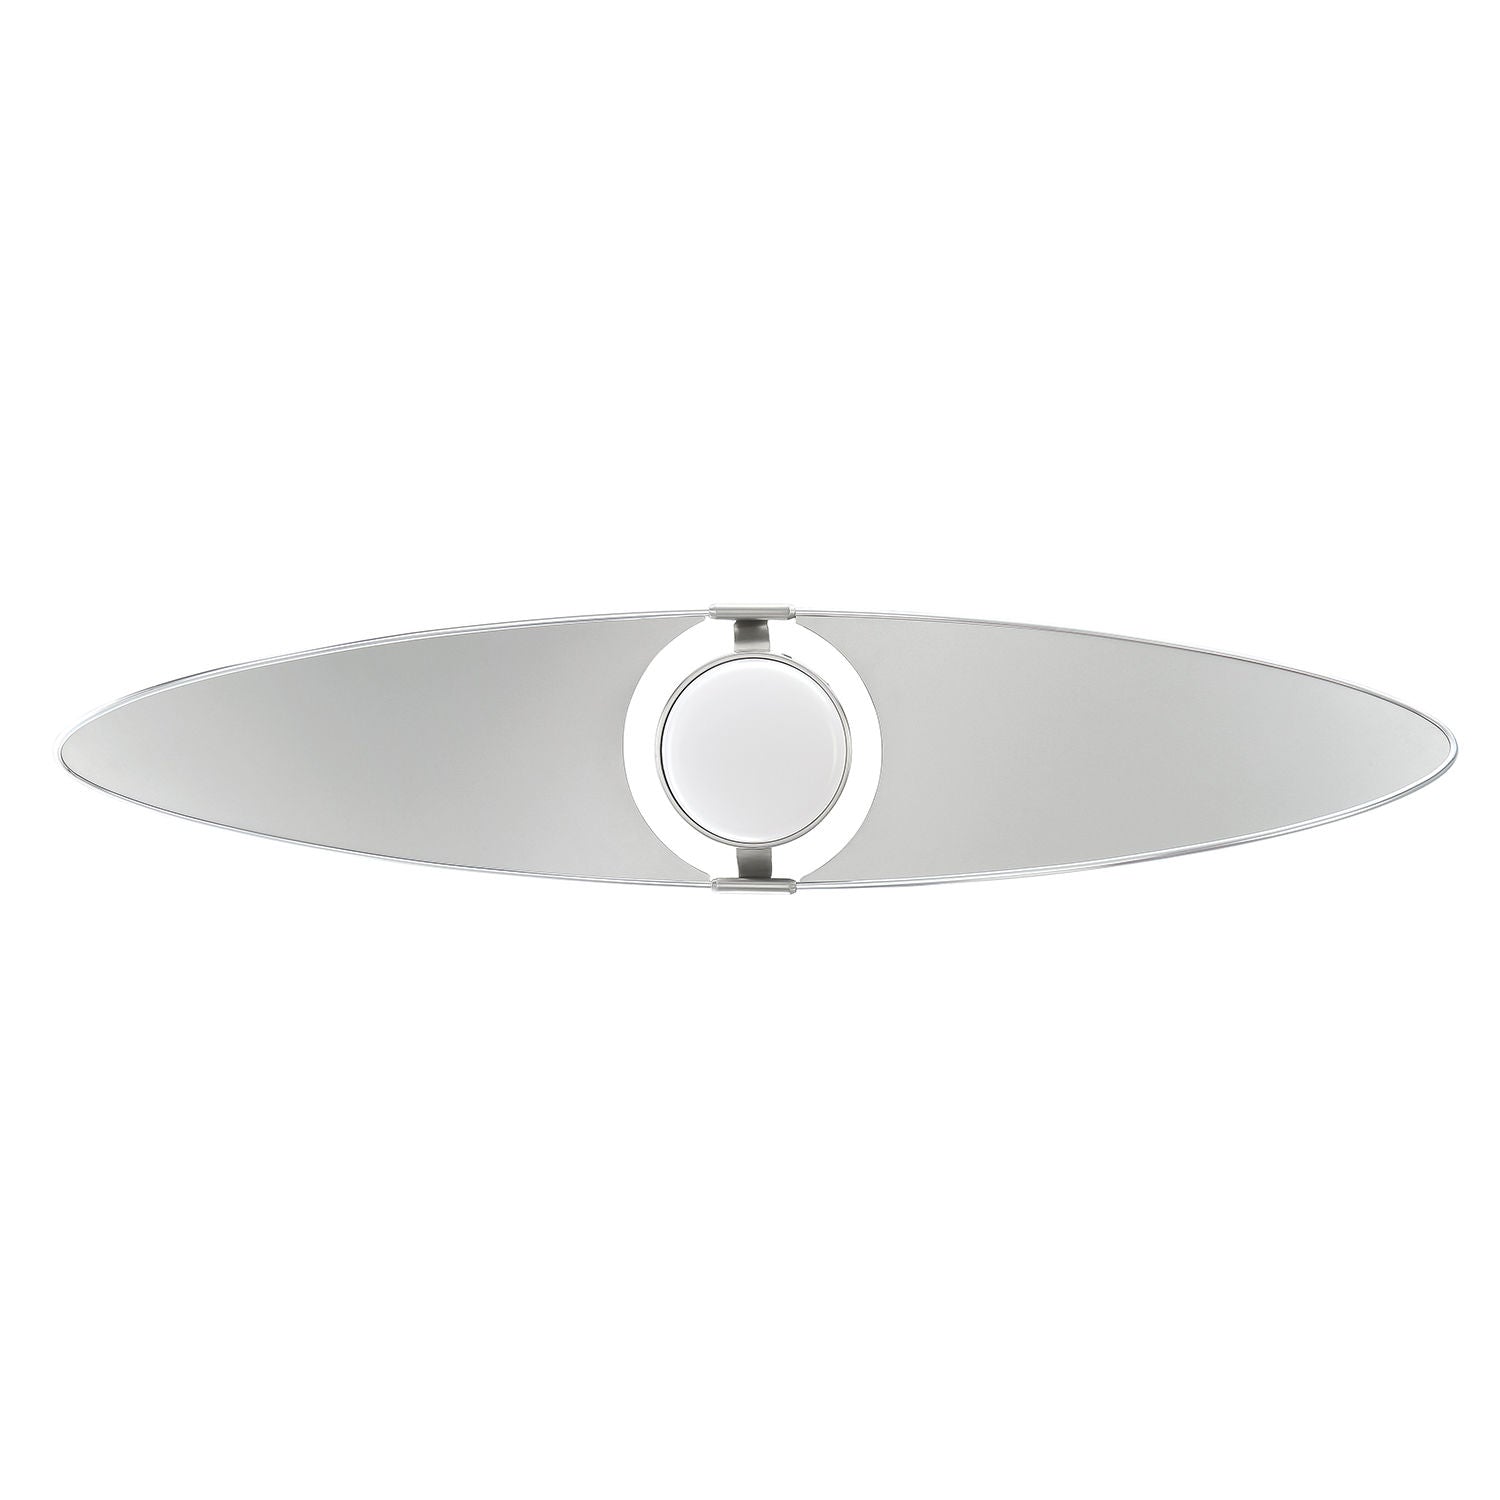 TANGO Ceiling fan Stainless steel INTEGRATED LED - AC22852-SN | KENDAL